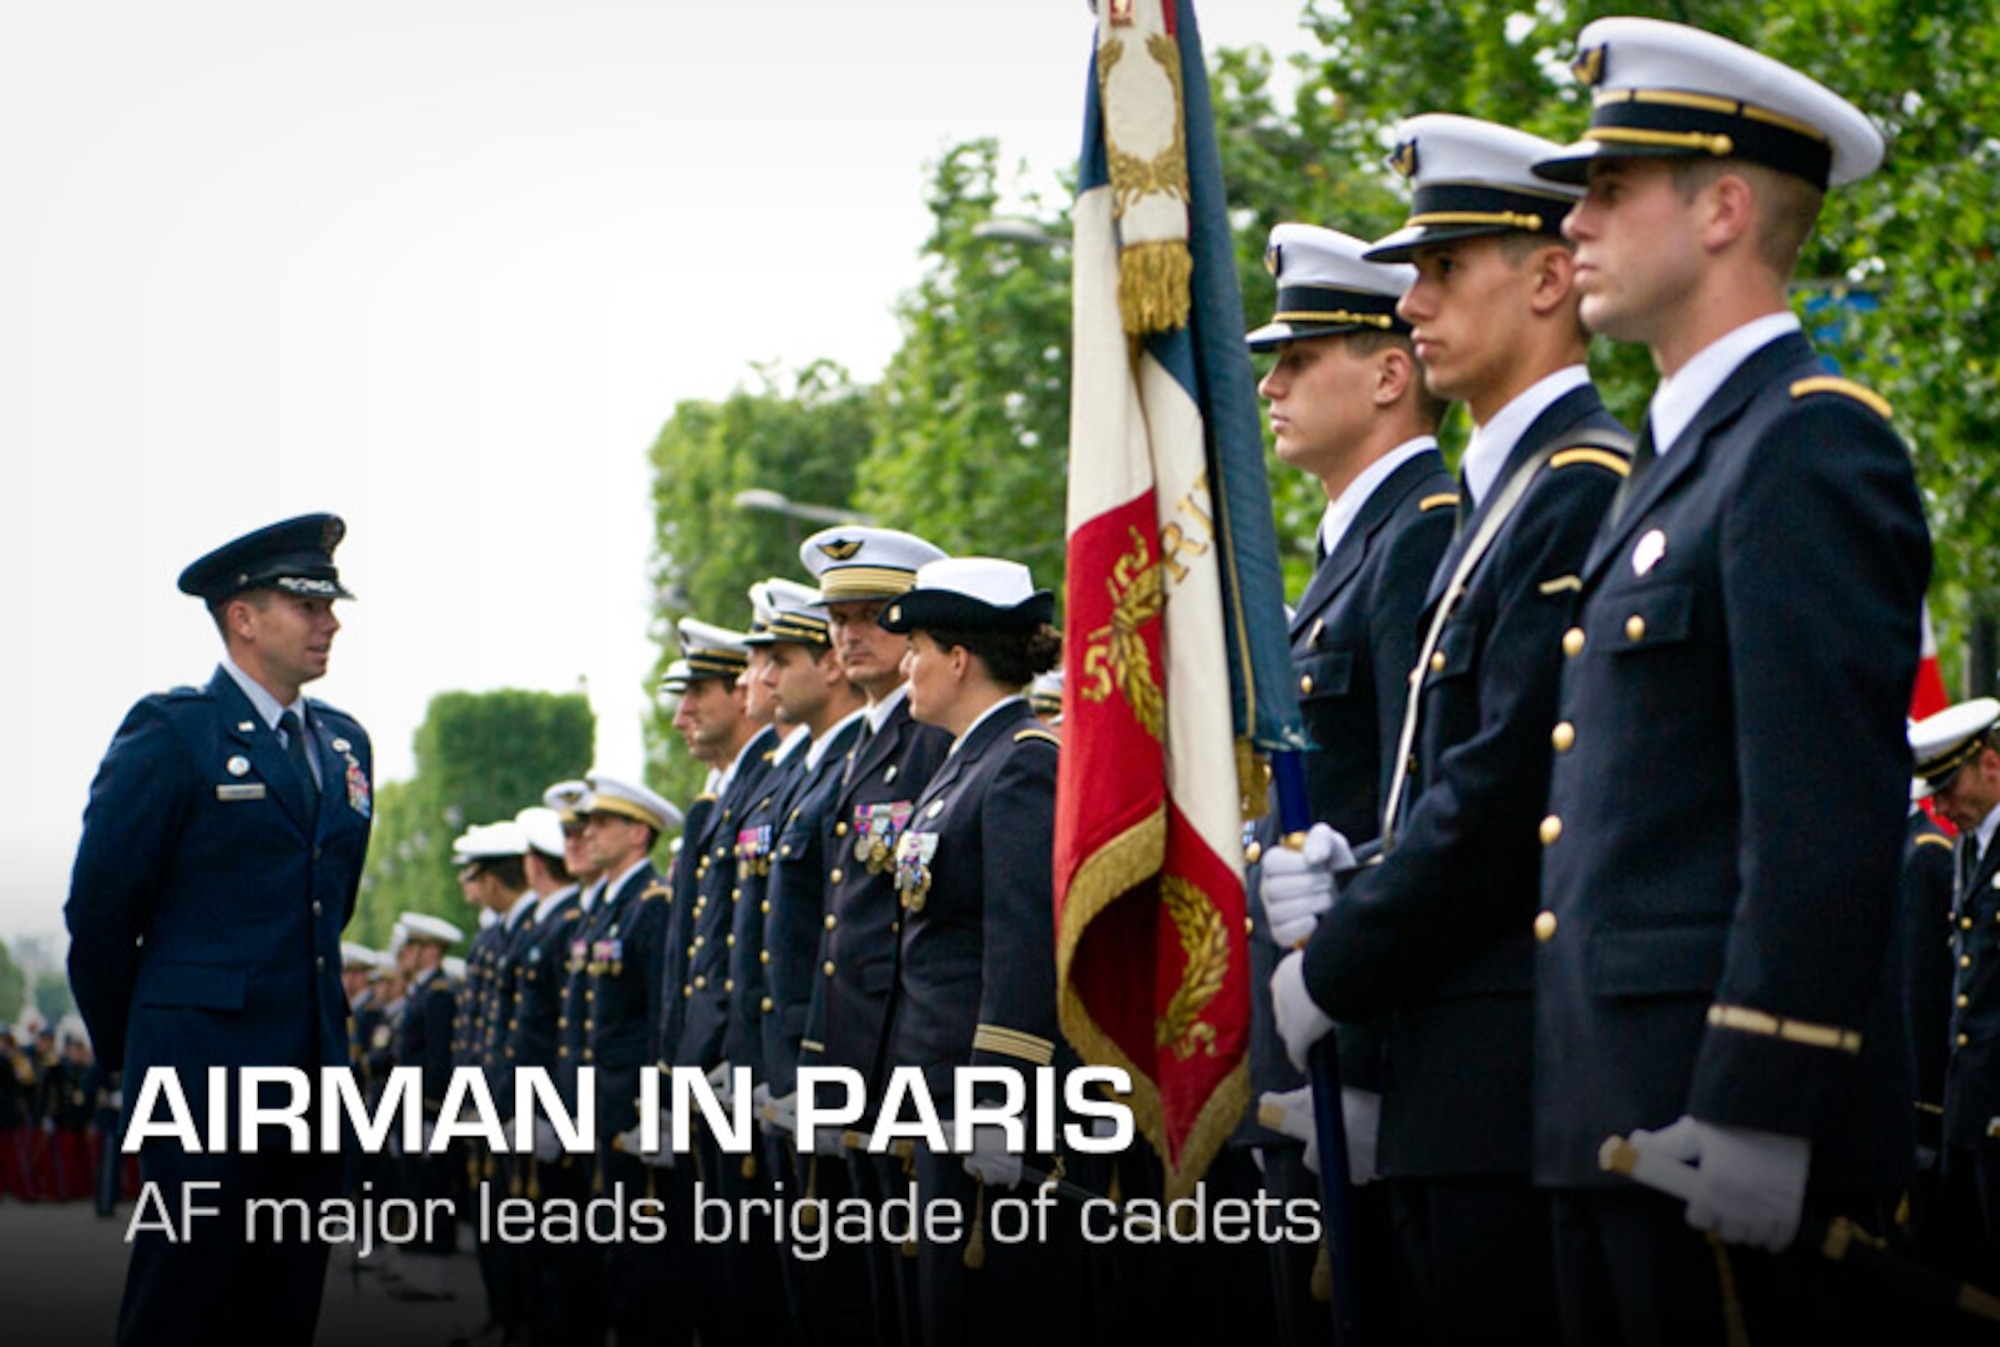 PARIS -- U.S. Air Force Maj. James Gingras, French Air Force Academy exchange officer, left, speaks with his cadets before marching in the 2012, 14th of July parade in Paris. The 14th of July, known in English by Bastille Day, is the French equivalent of the American 4th of July. It commemorates the attack on the Bastille on July 14, 1989, which preceded the French revolution. (U.S. Air Force photo/Staff Sgt. Benjamin Wilson)
